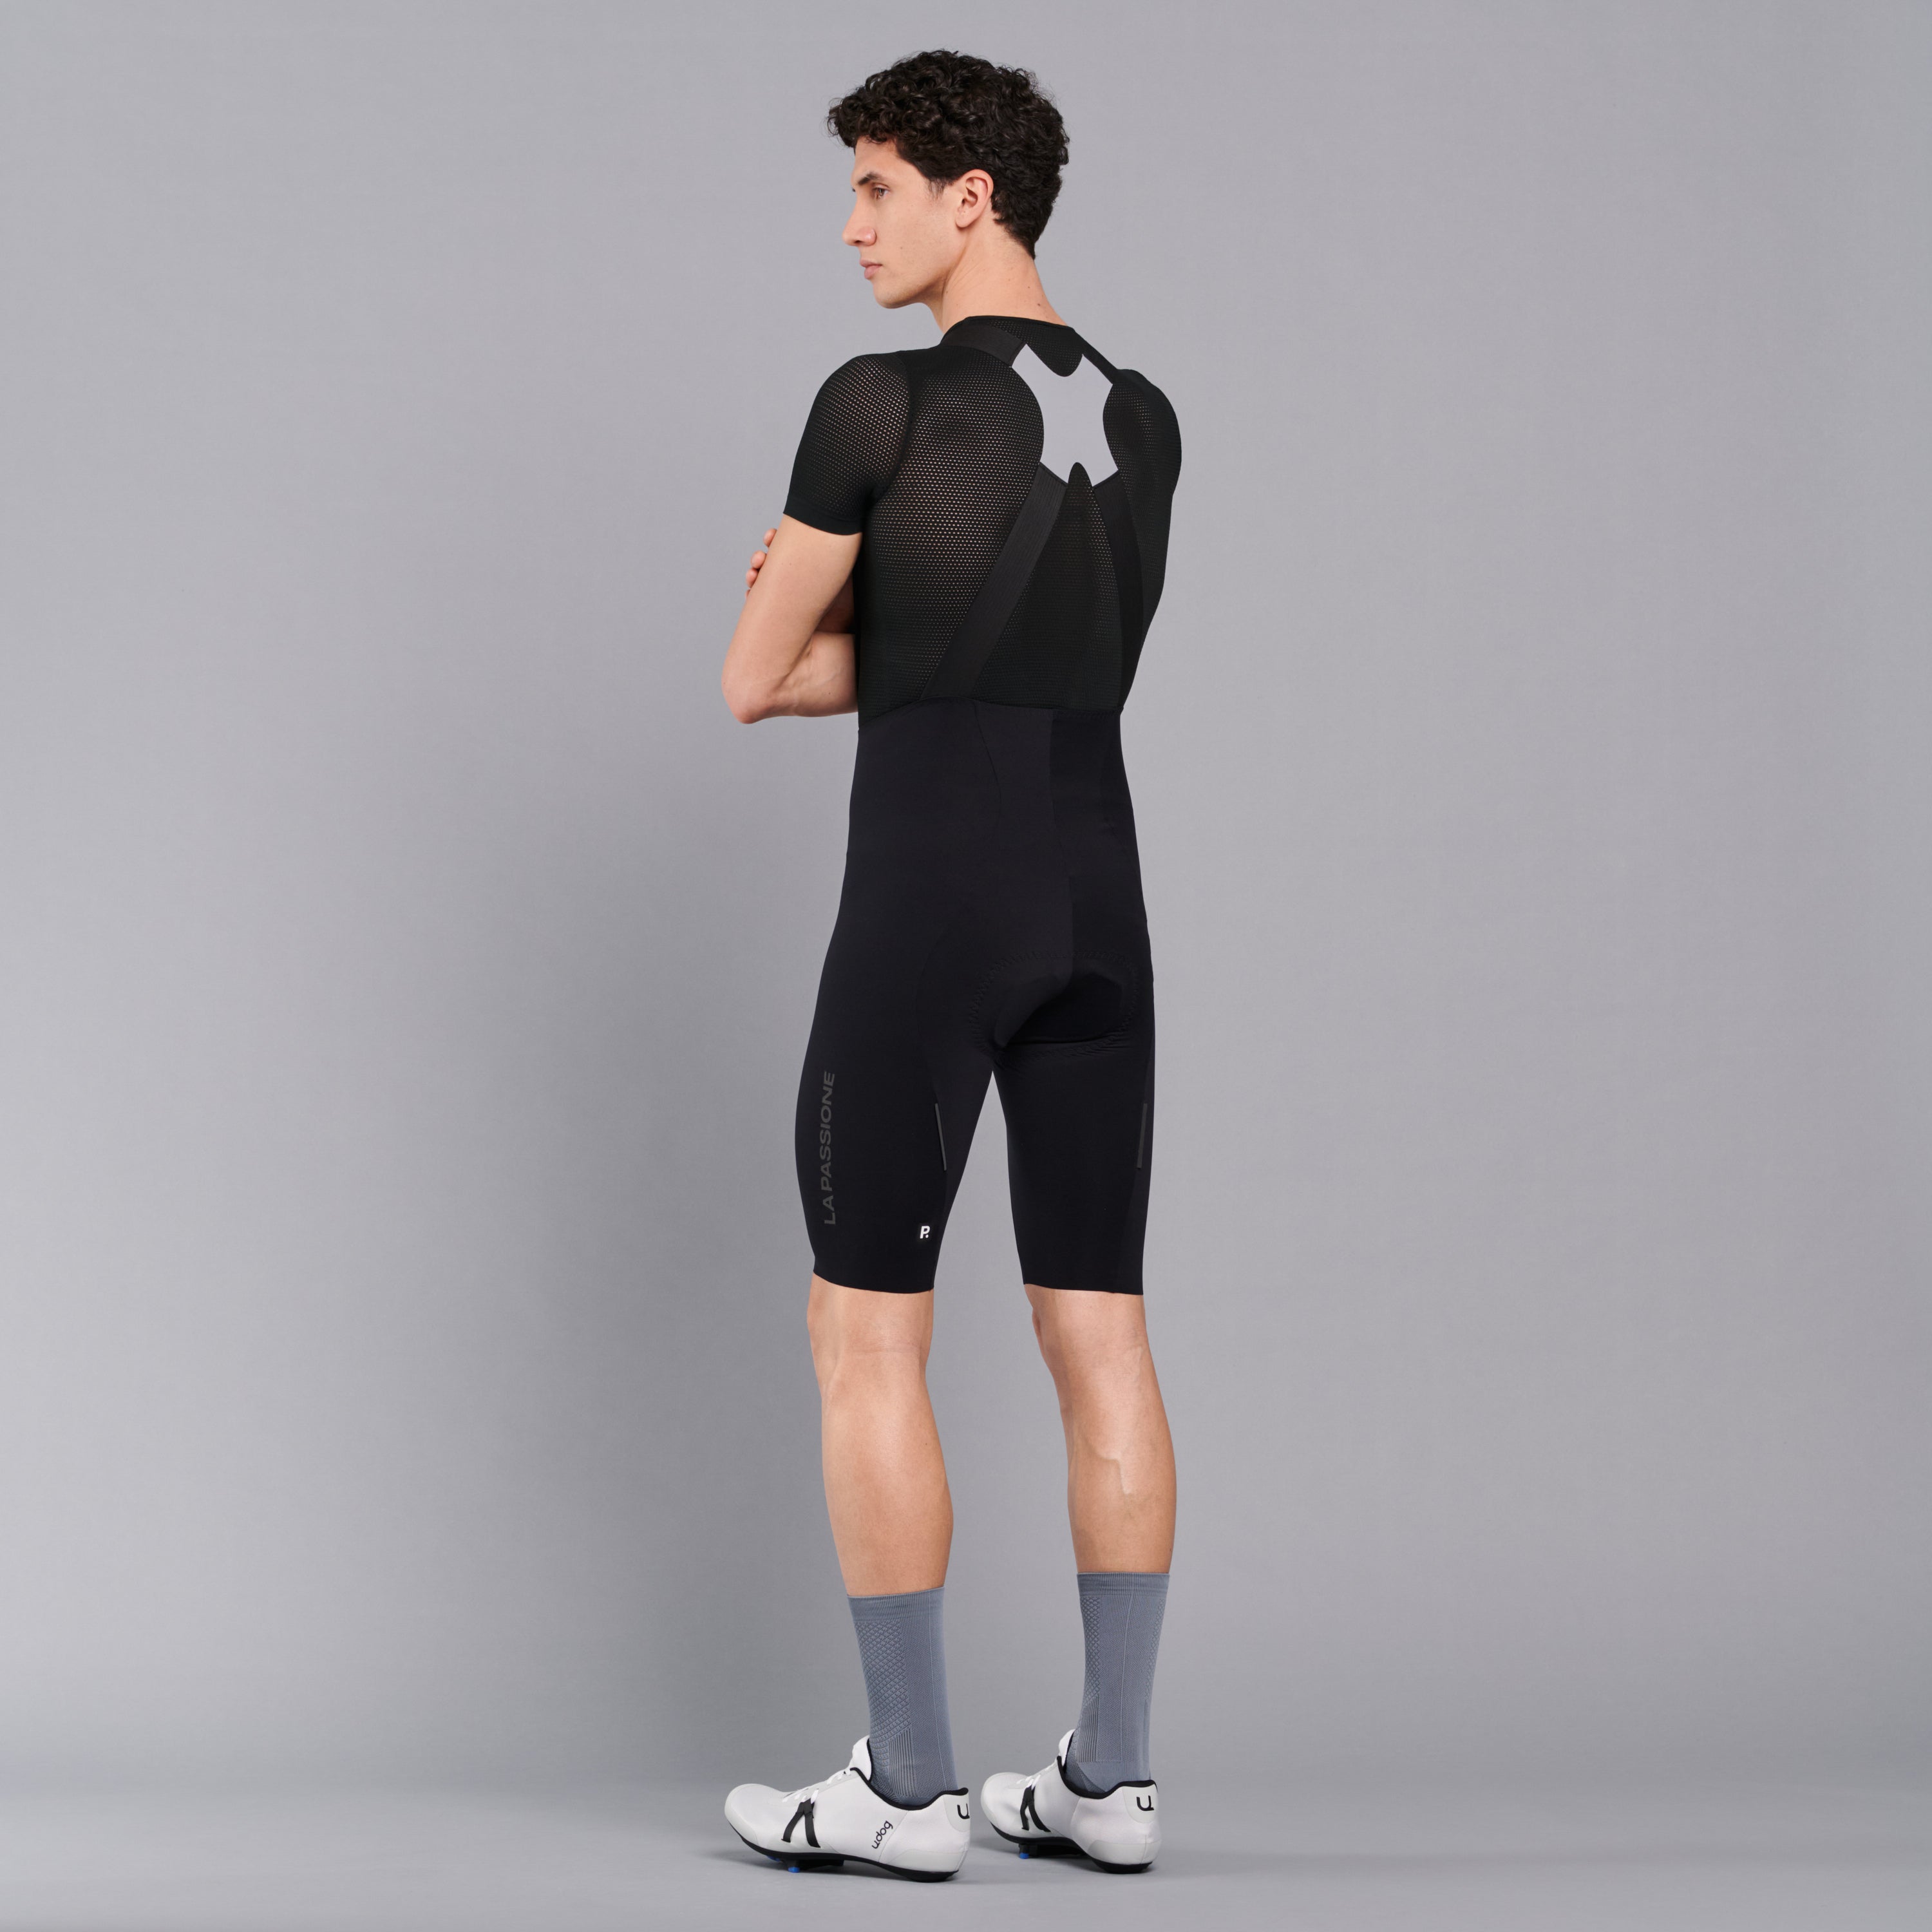 Bib Shorts and Tights – La Passione Cycling Couture